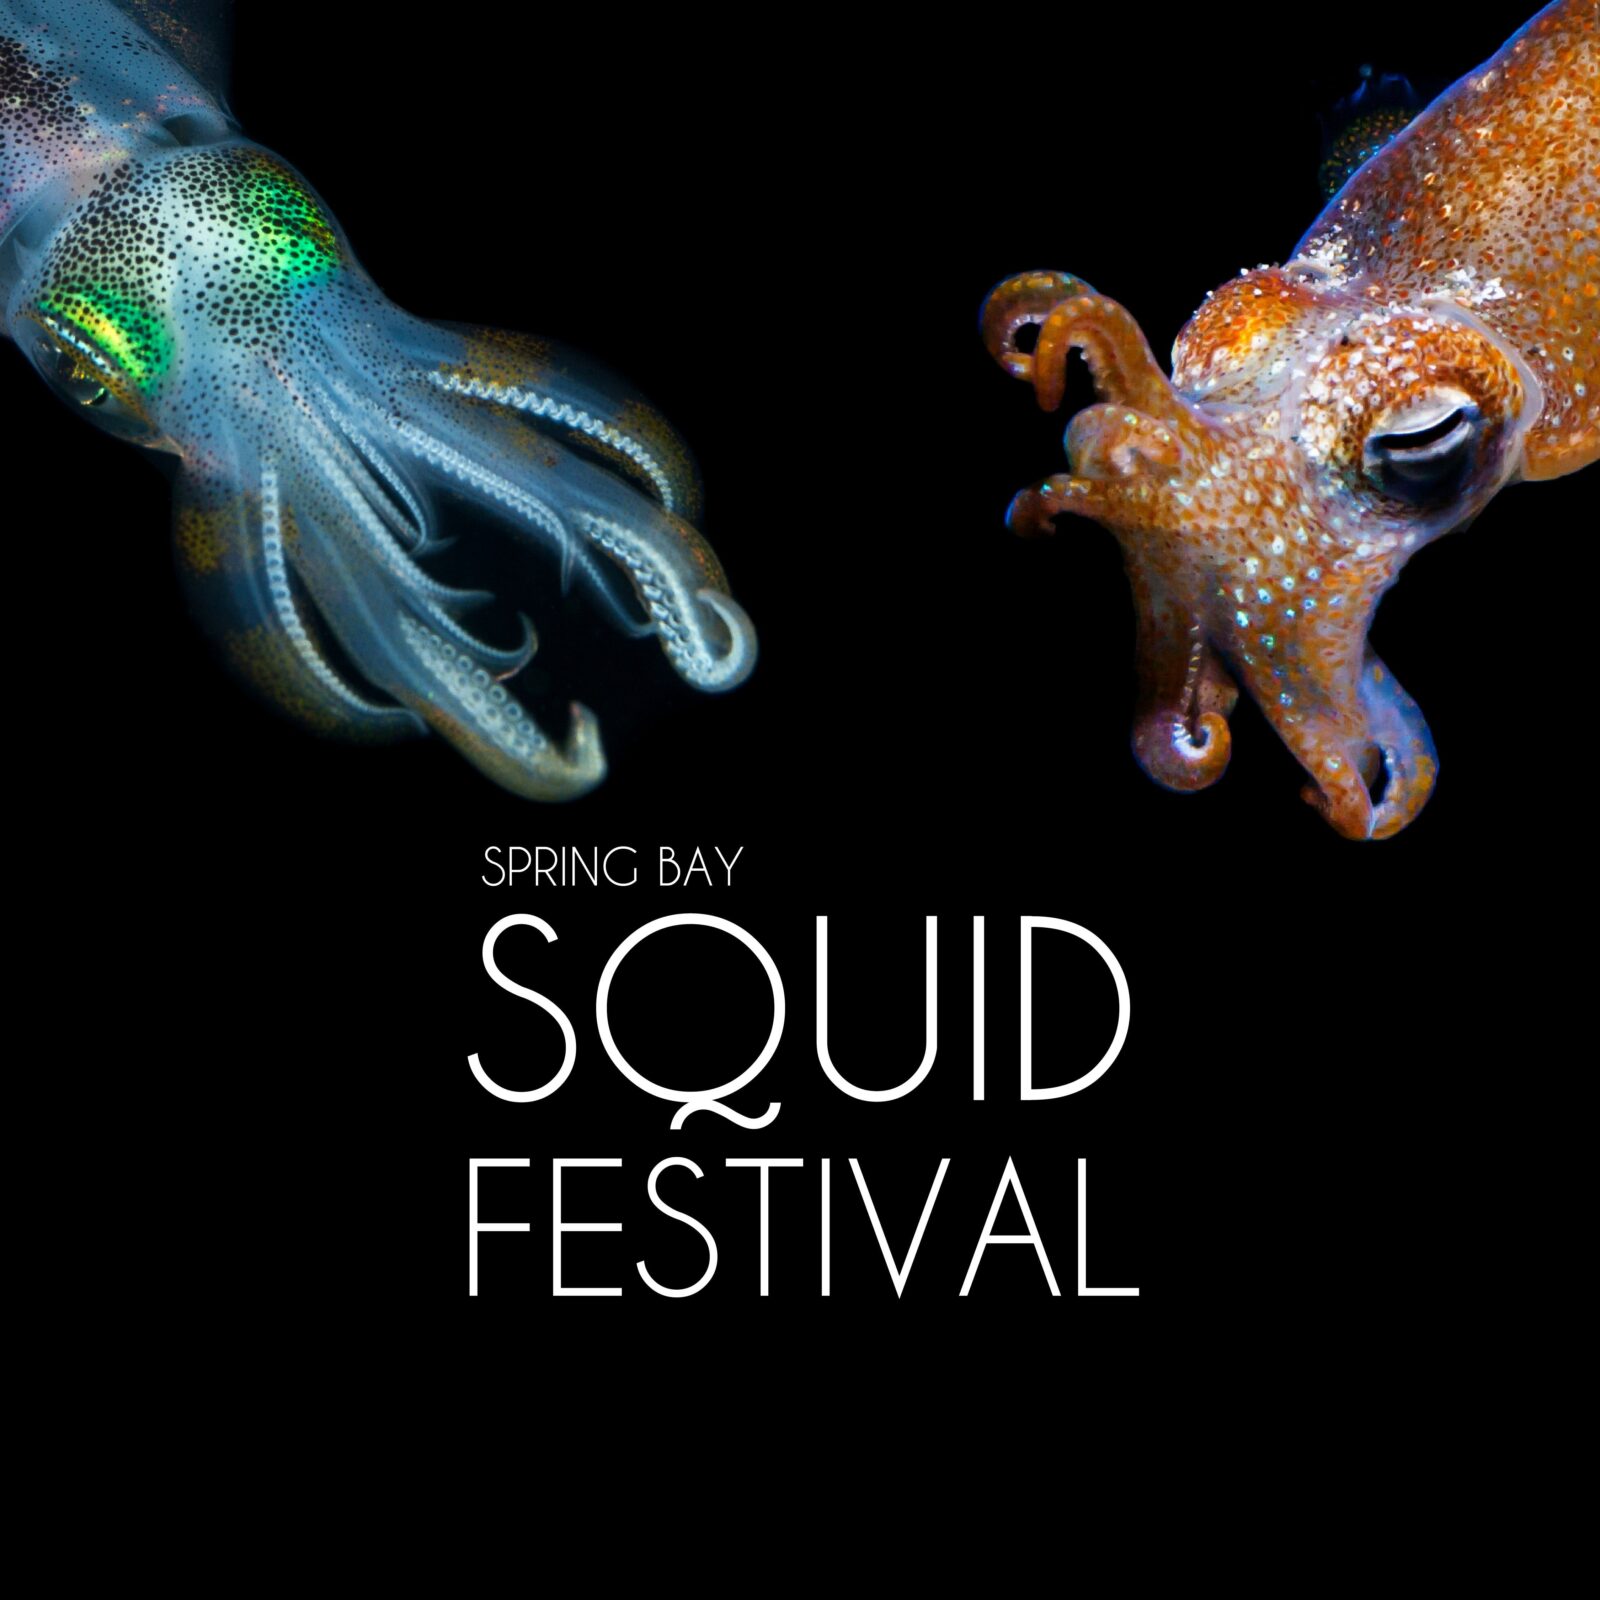 Two colourful squids on a black background loom toward a heading in white text: The Squid Festival